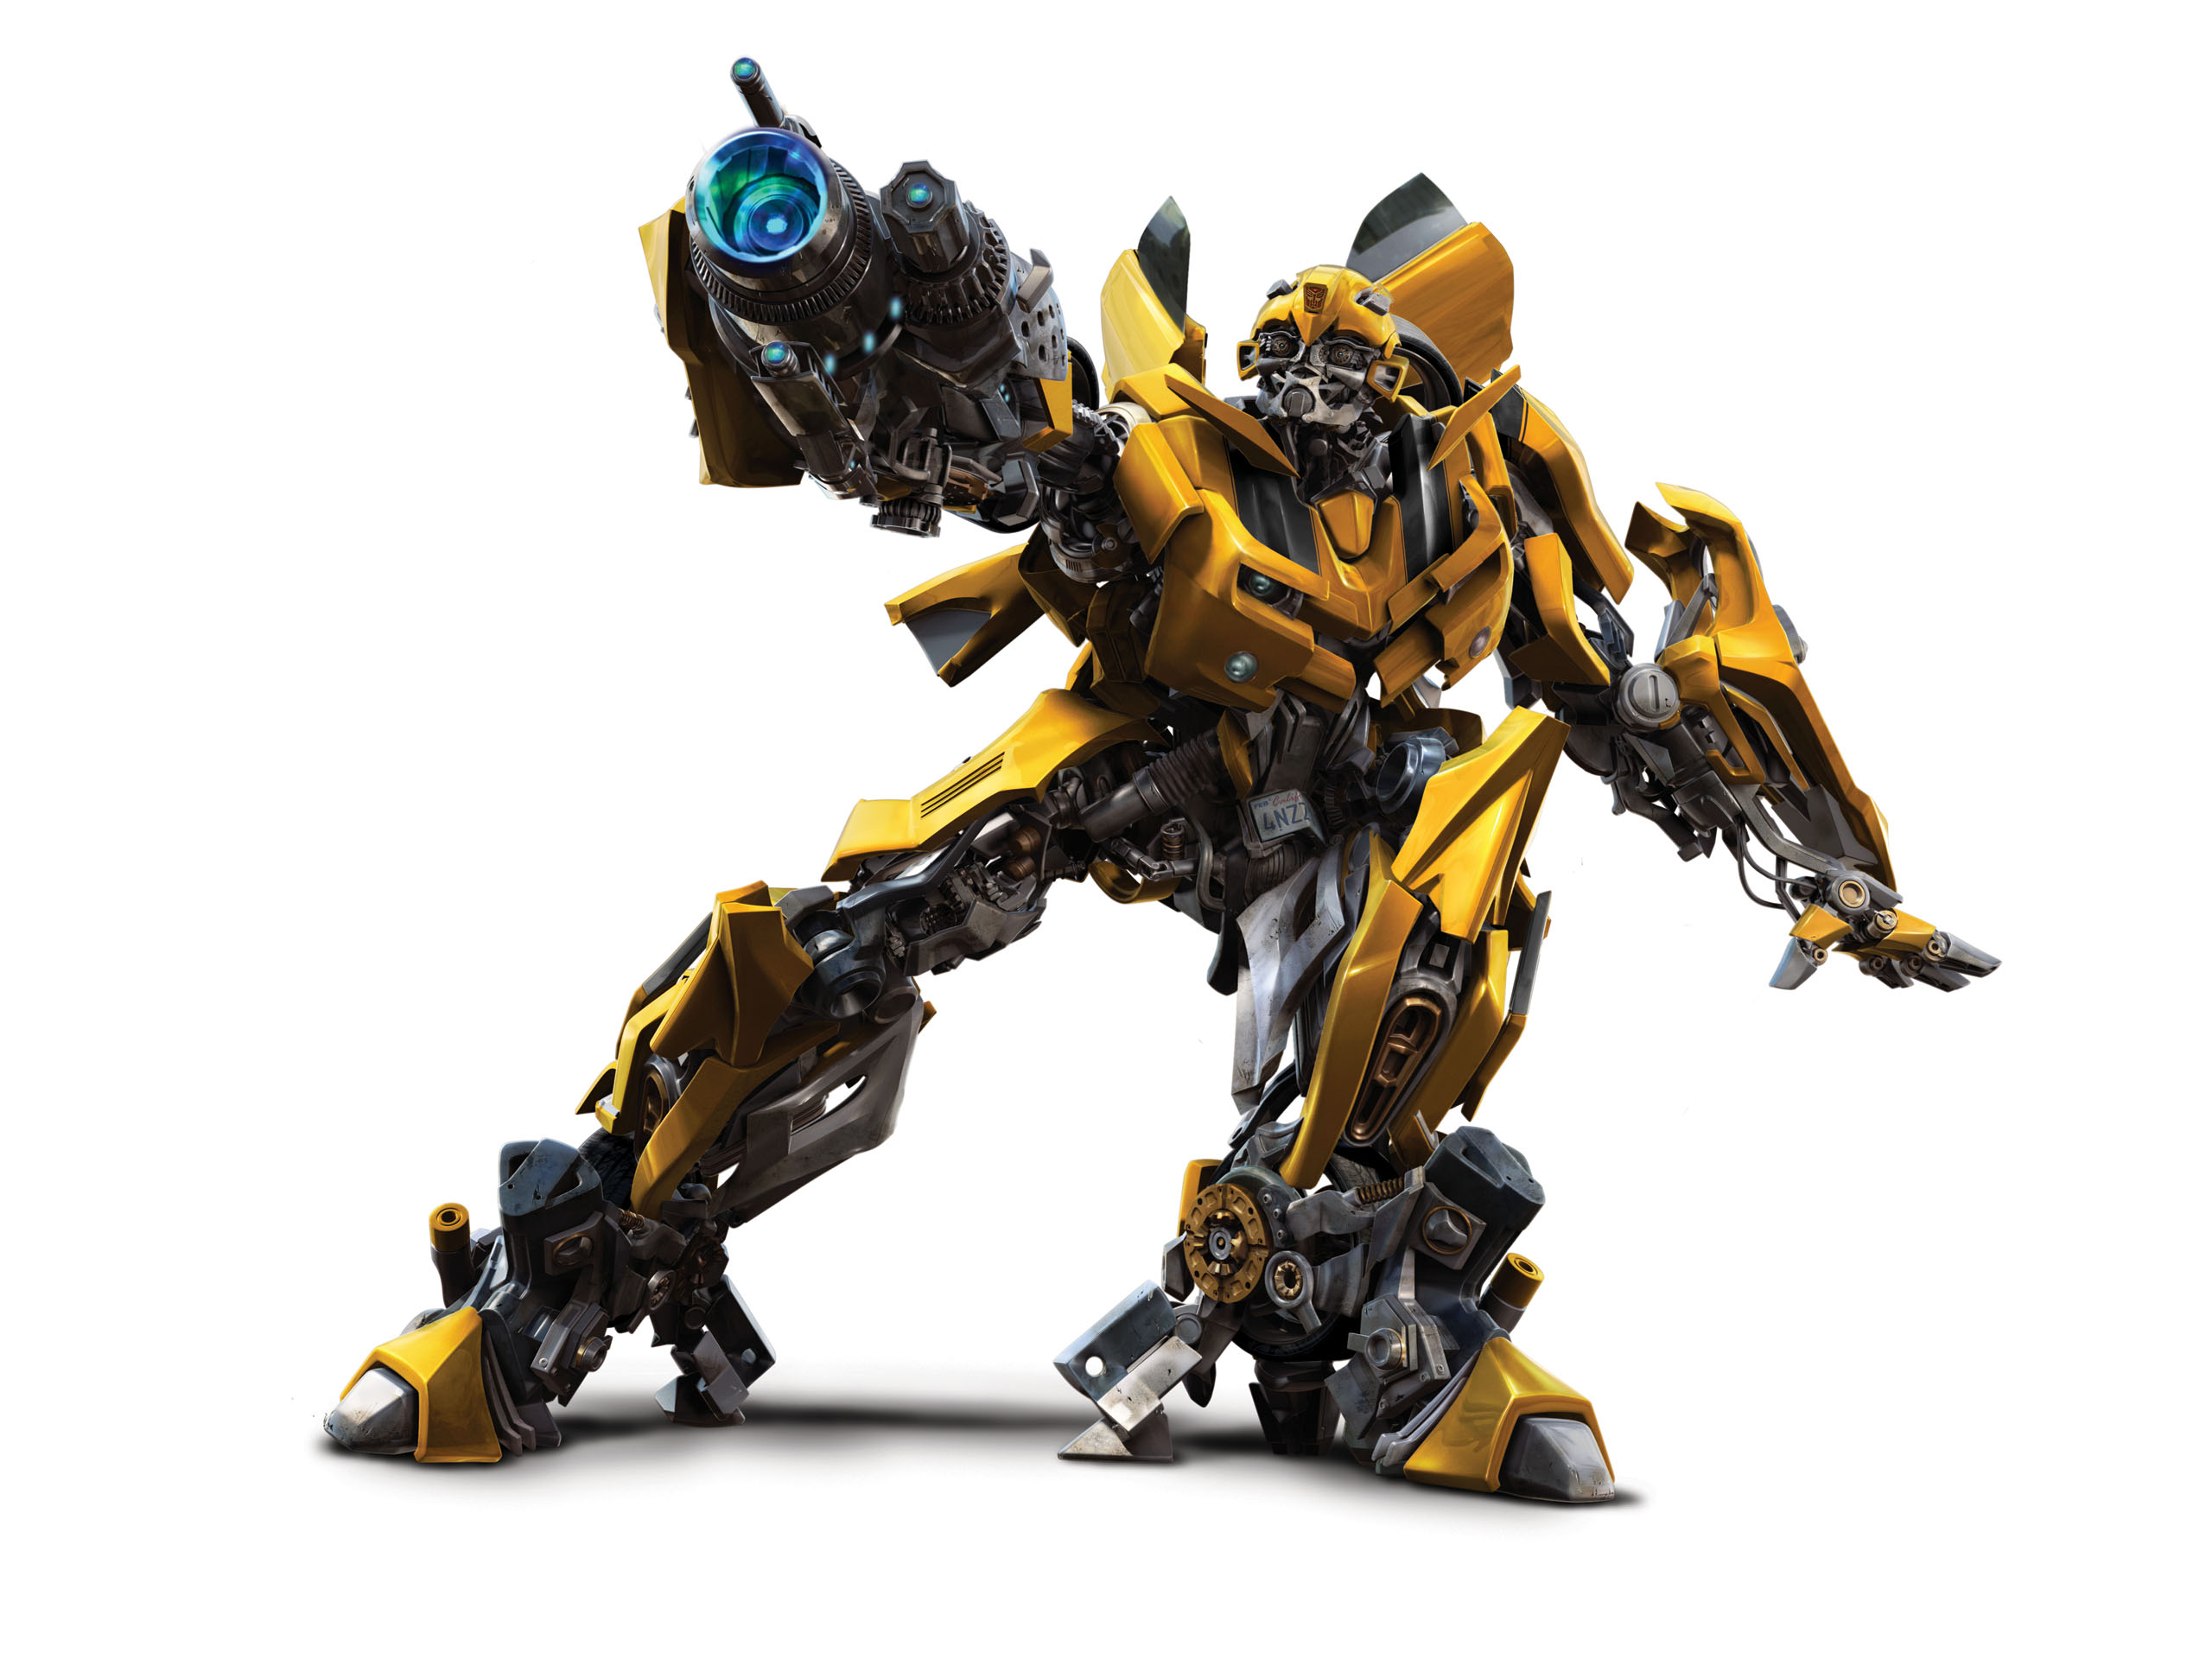 Transformers Bumble Bee HD Wallpaper Animation